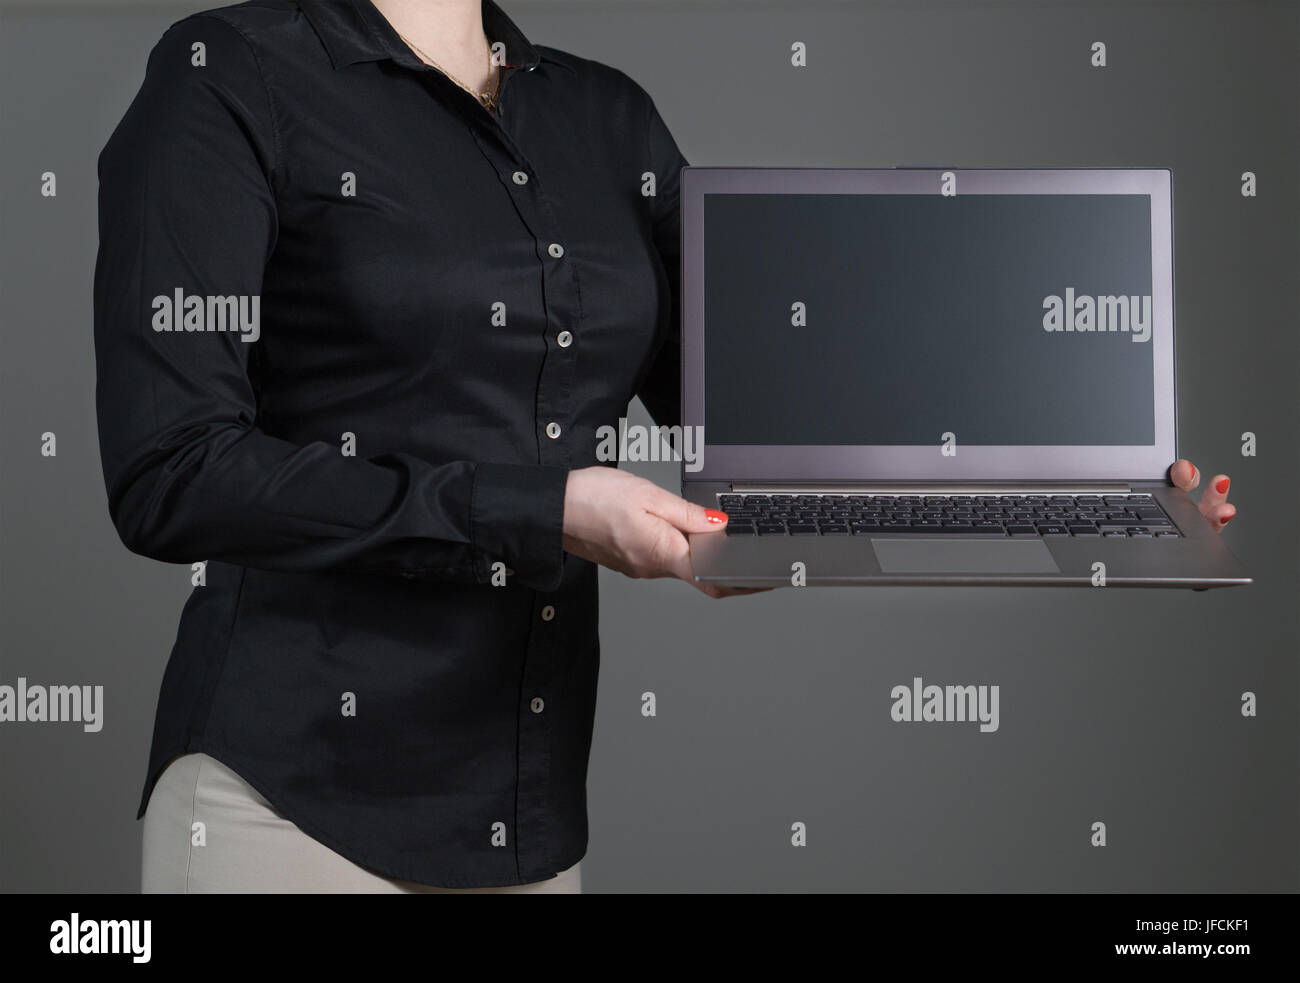 Business woman presenting a software or showing an application. Girl holding laptop with dynamic pose and black collared shirt. Empty screen. Stock Photo